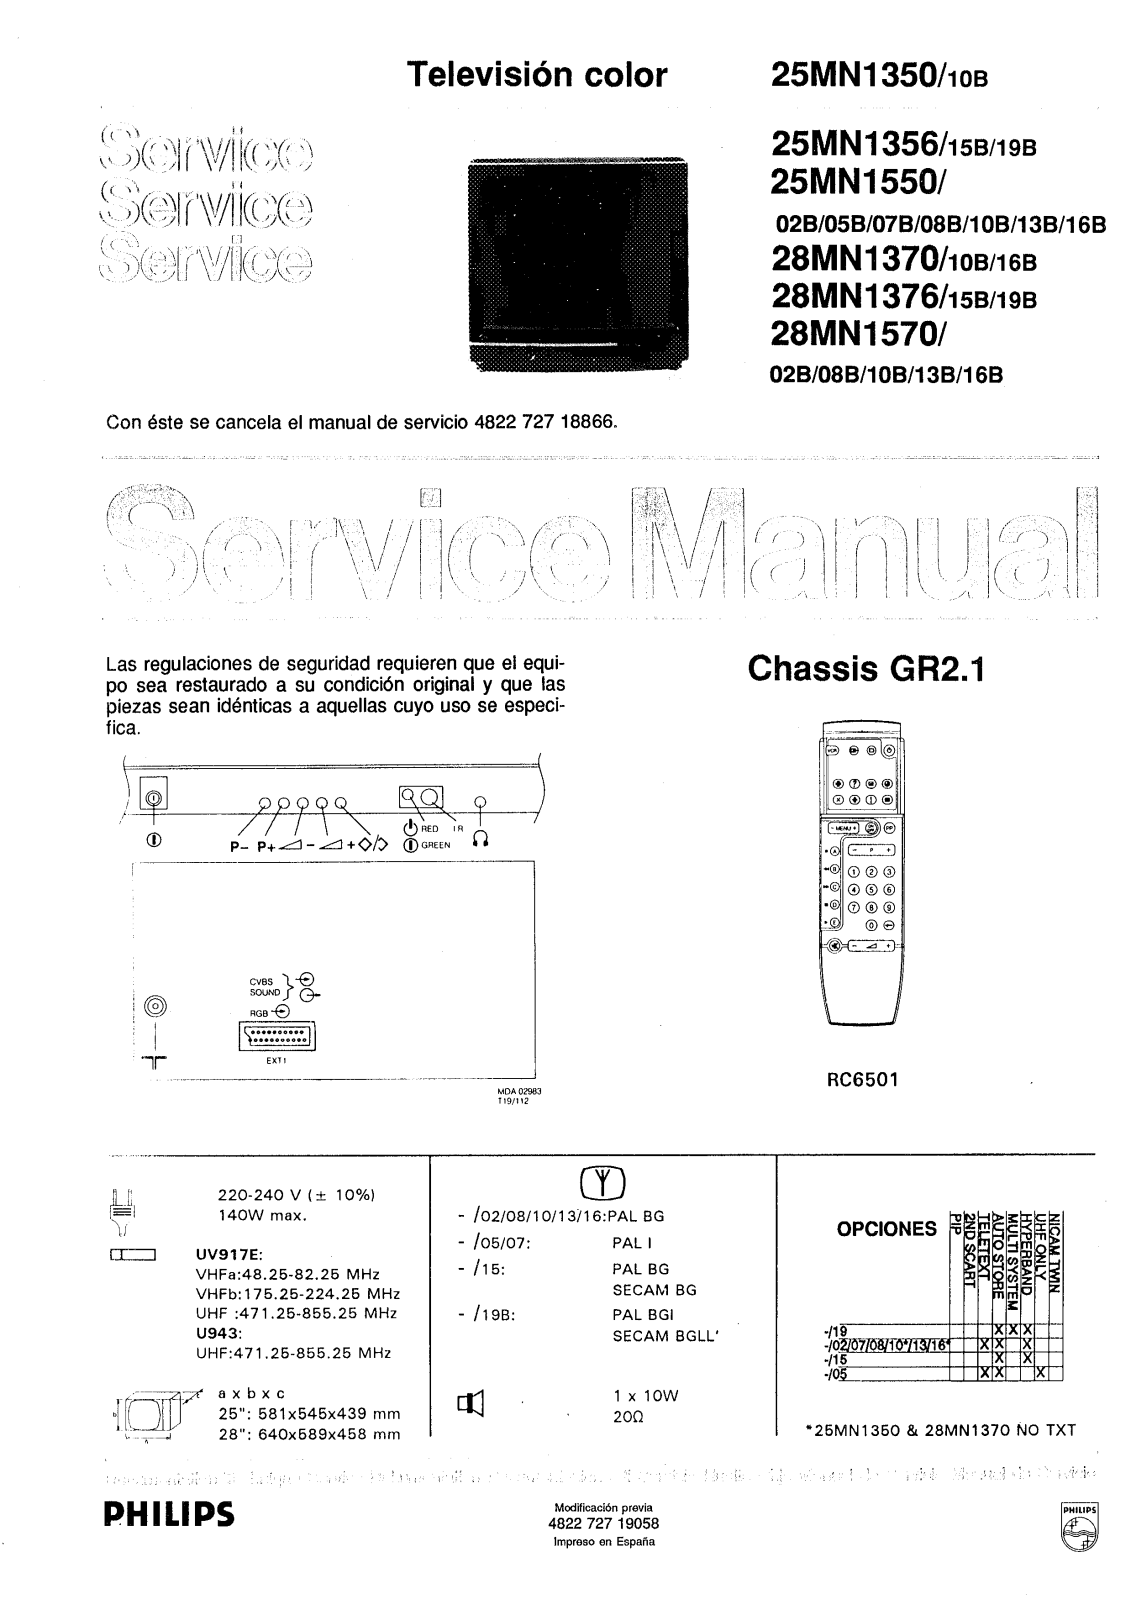 Philips 25MN1550 Service Manual